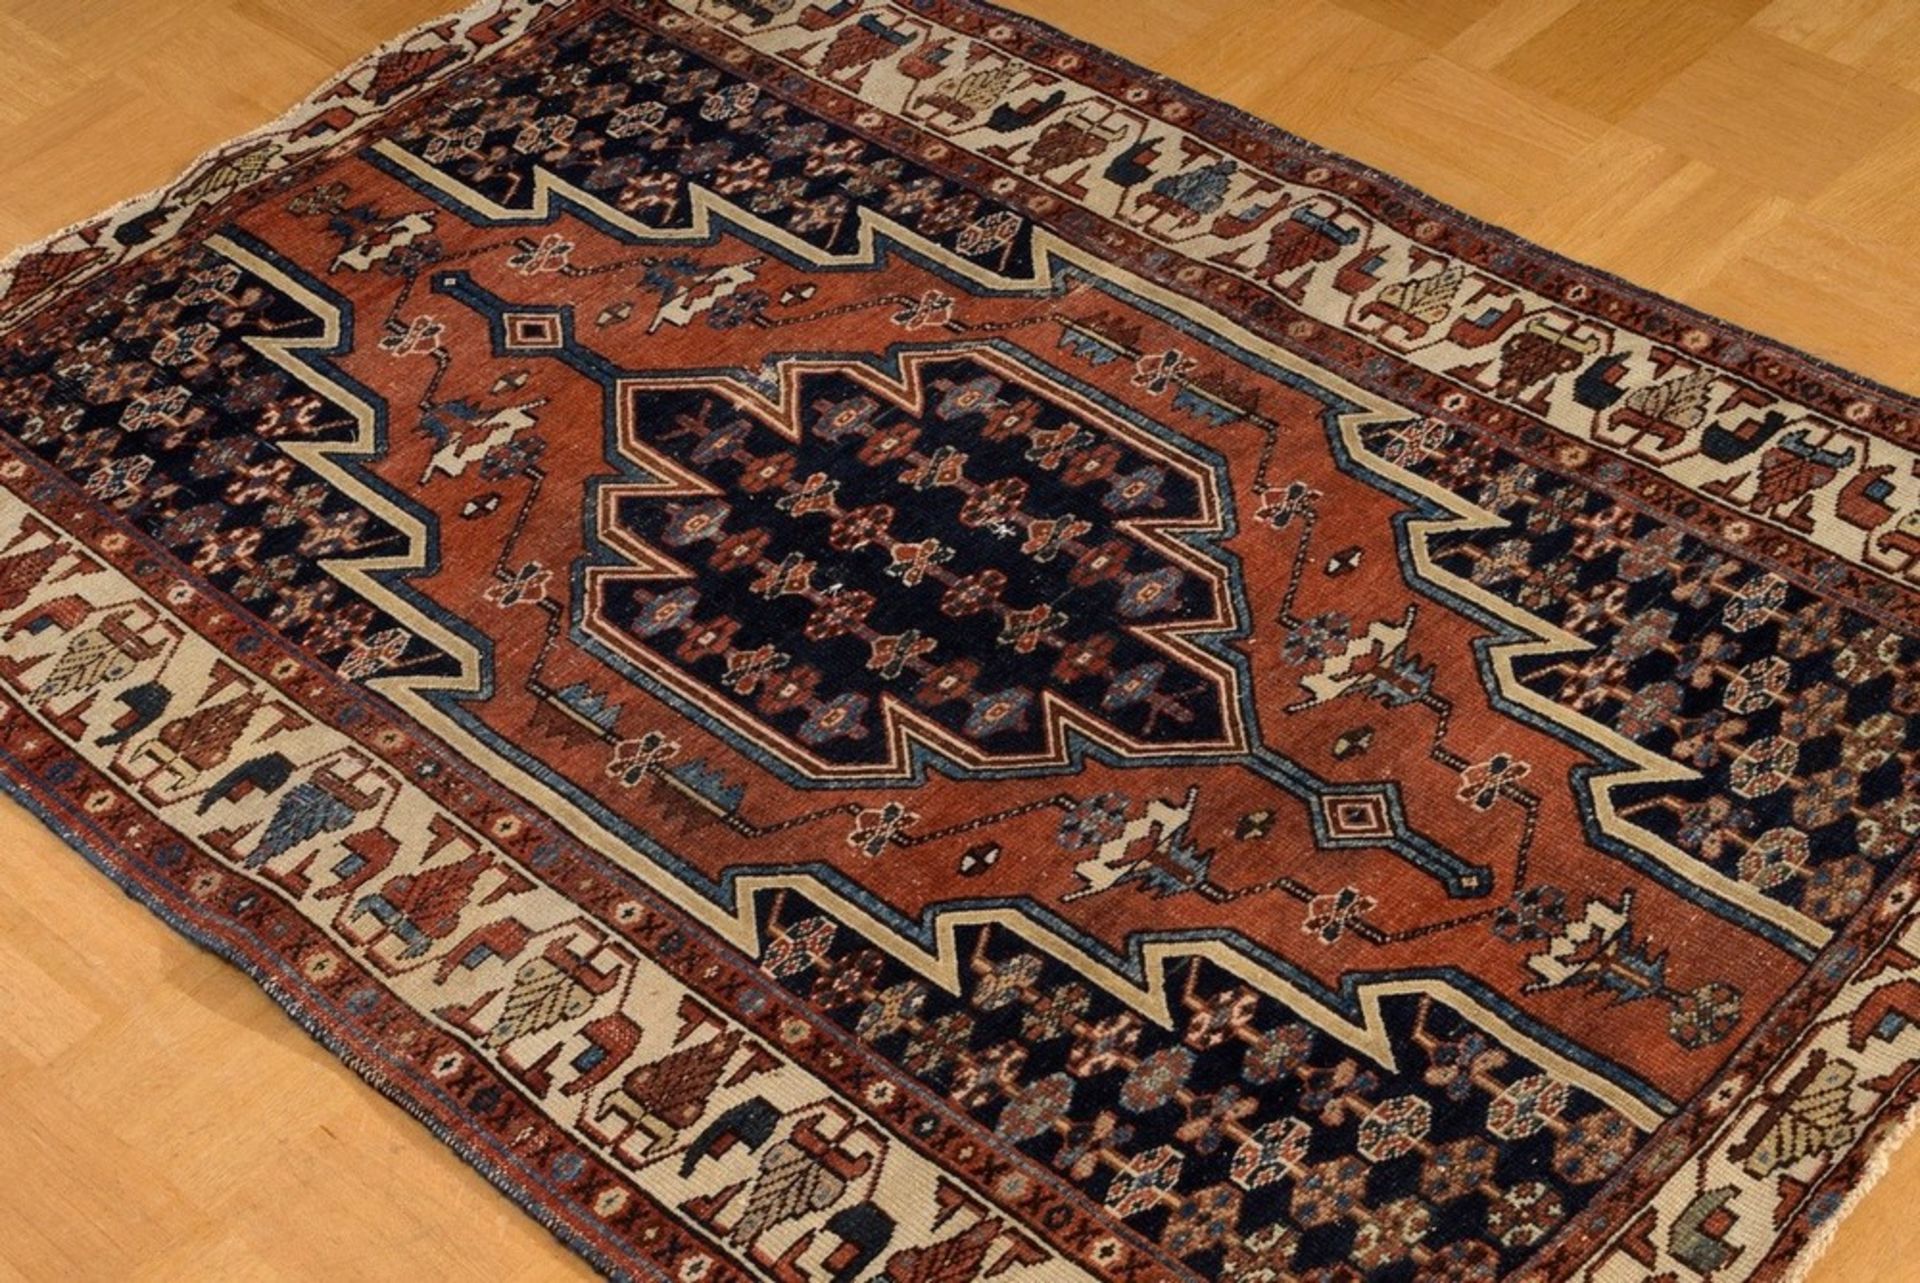 Mazlaghan carpet with typical outline of sharp serrations around the central medallion on a pattern - Image 2 of 6